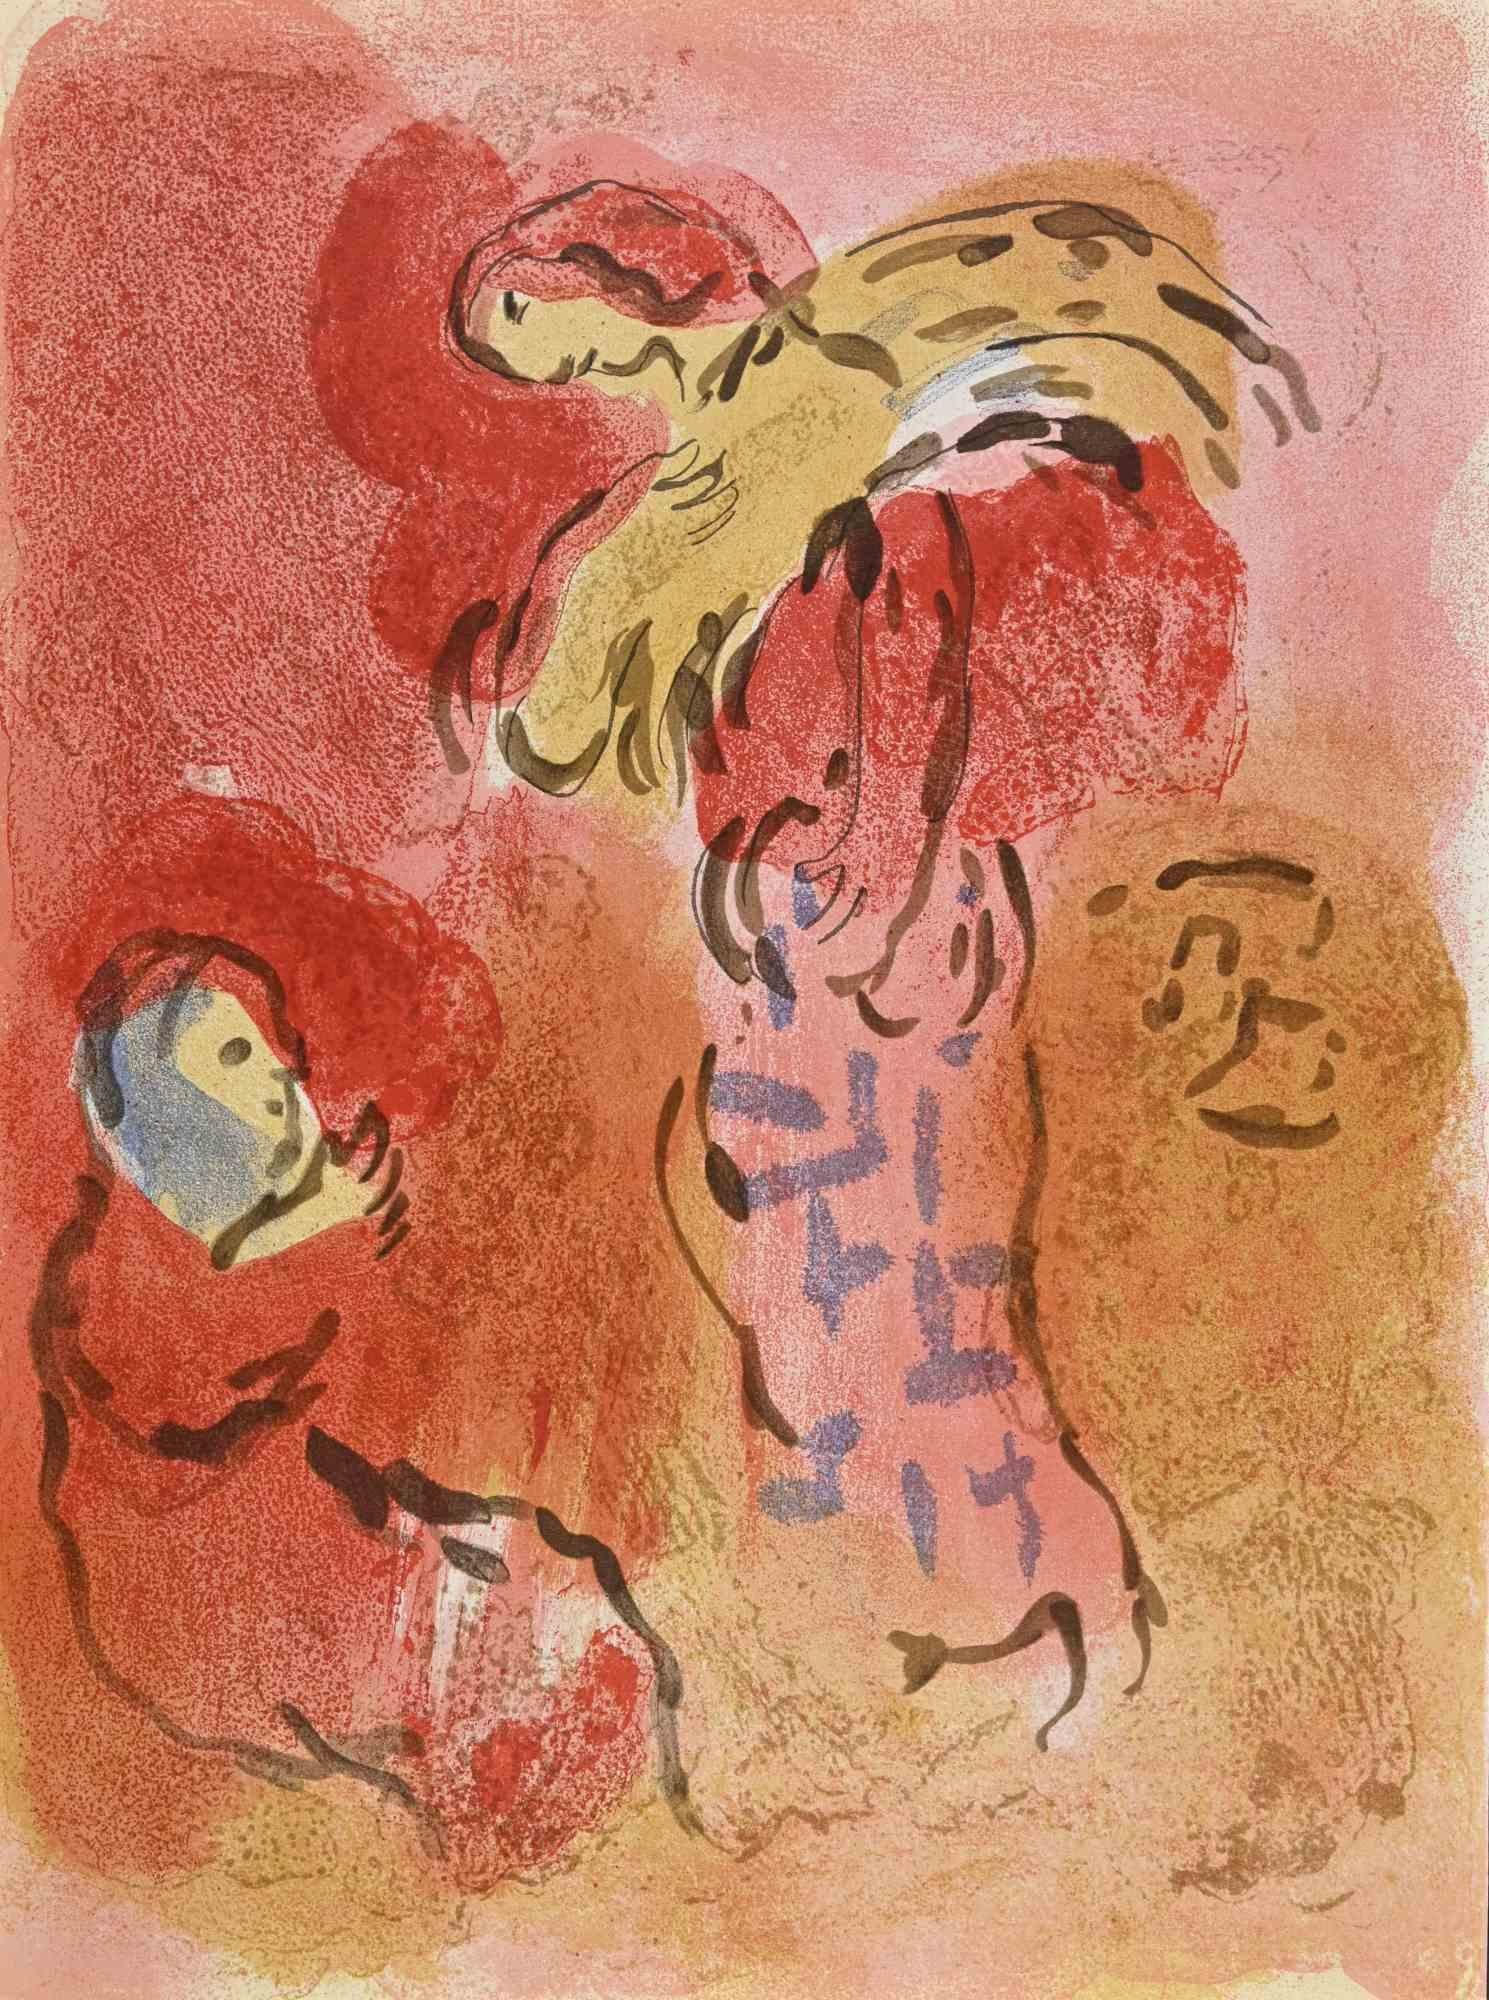 Ruth gleaning  is an artwork from the Series "The Bible", by Marc Chagall in 1960.
Mixed colored lithograph on brown-toned paper, no signature.
Edition of 6500 unsigned lithographs. Printed by Mourlot and published by Tériade, Paris.
Ref. Mourlot,